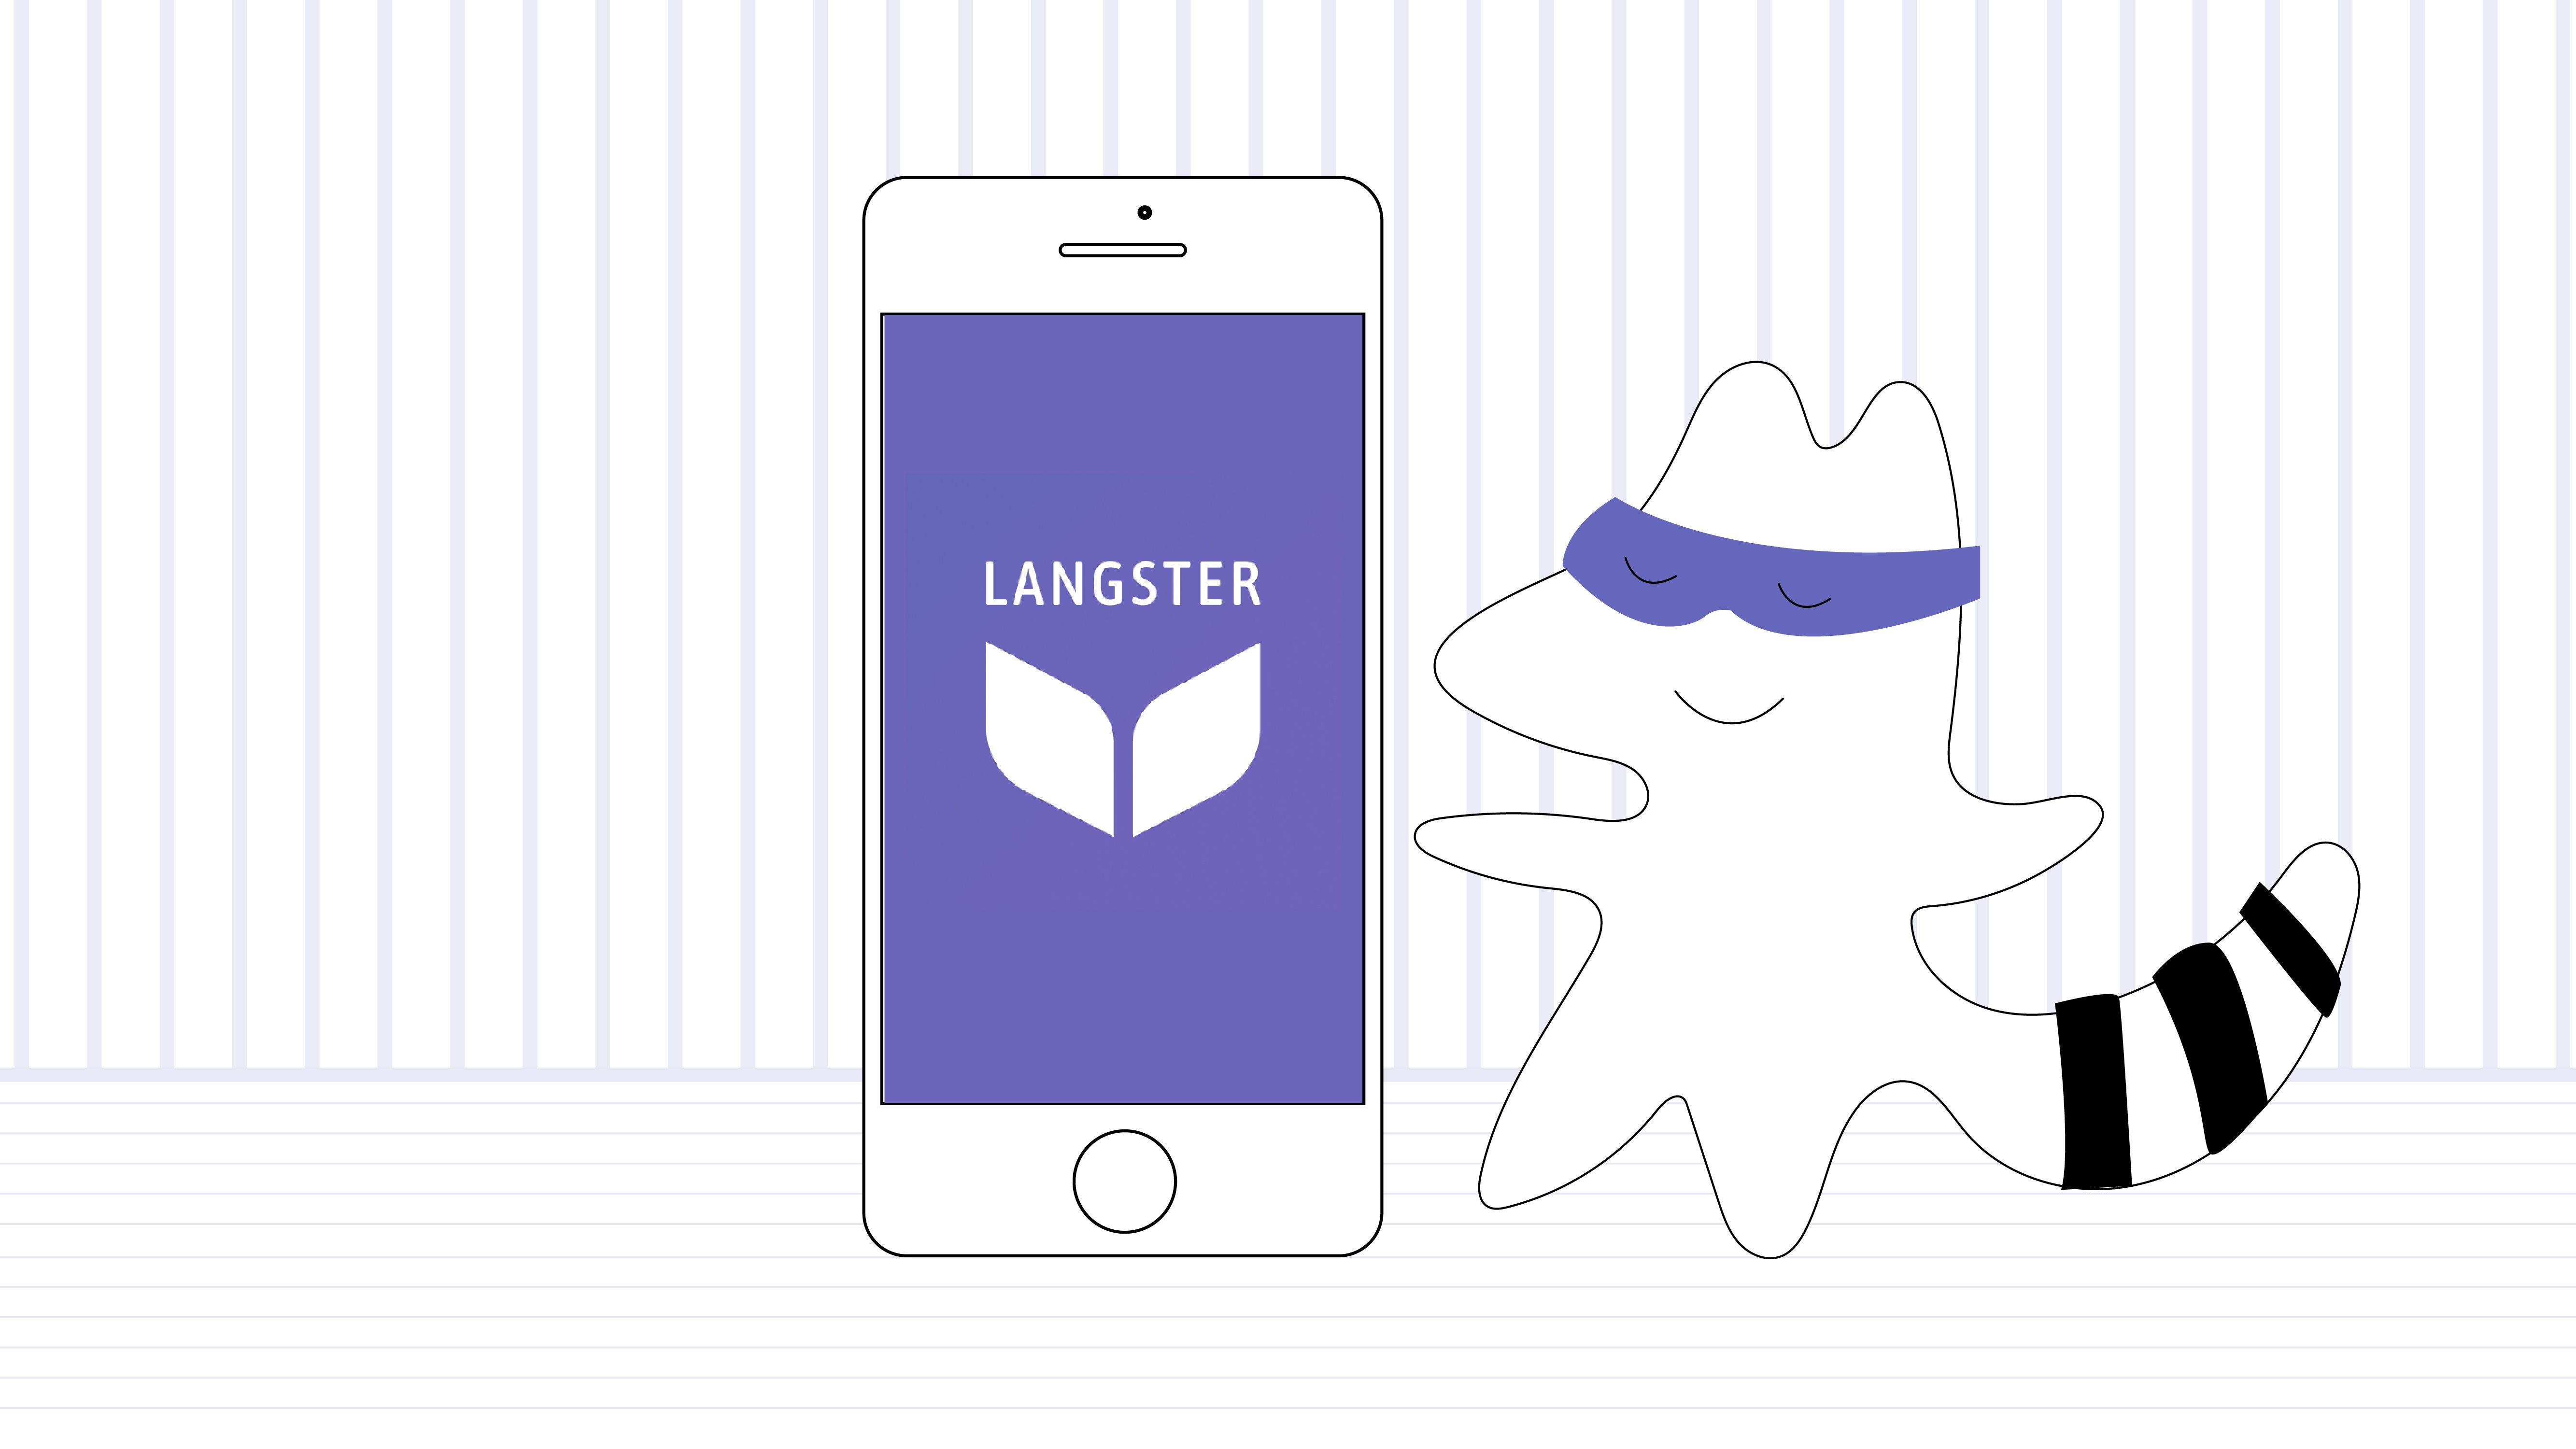 Iggy holding up his phone screen with a smile, showing the Langster logo.